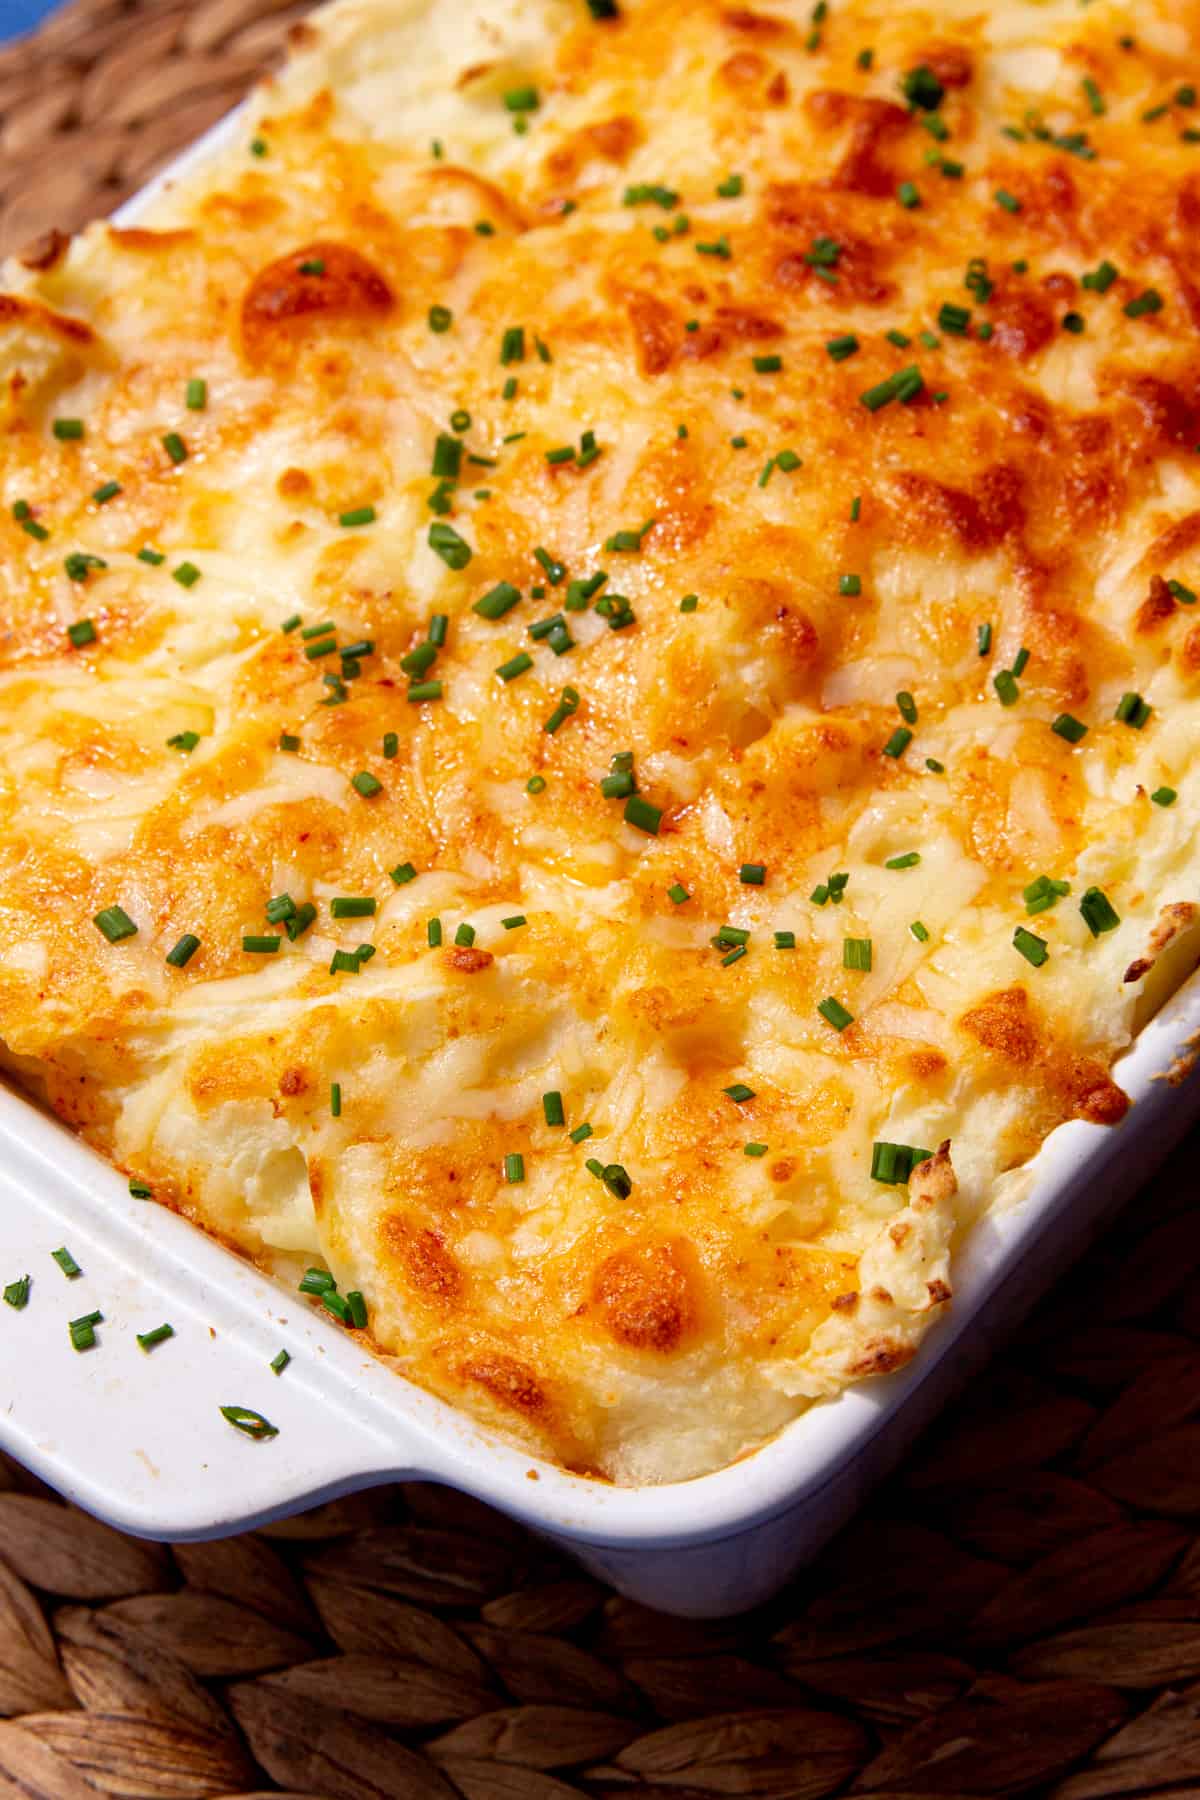 Mash potatoes with golden browned cheesy topping in a white baking dish in partial view.